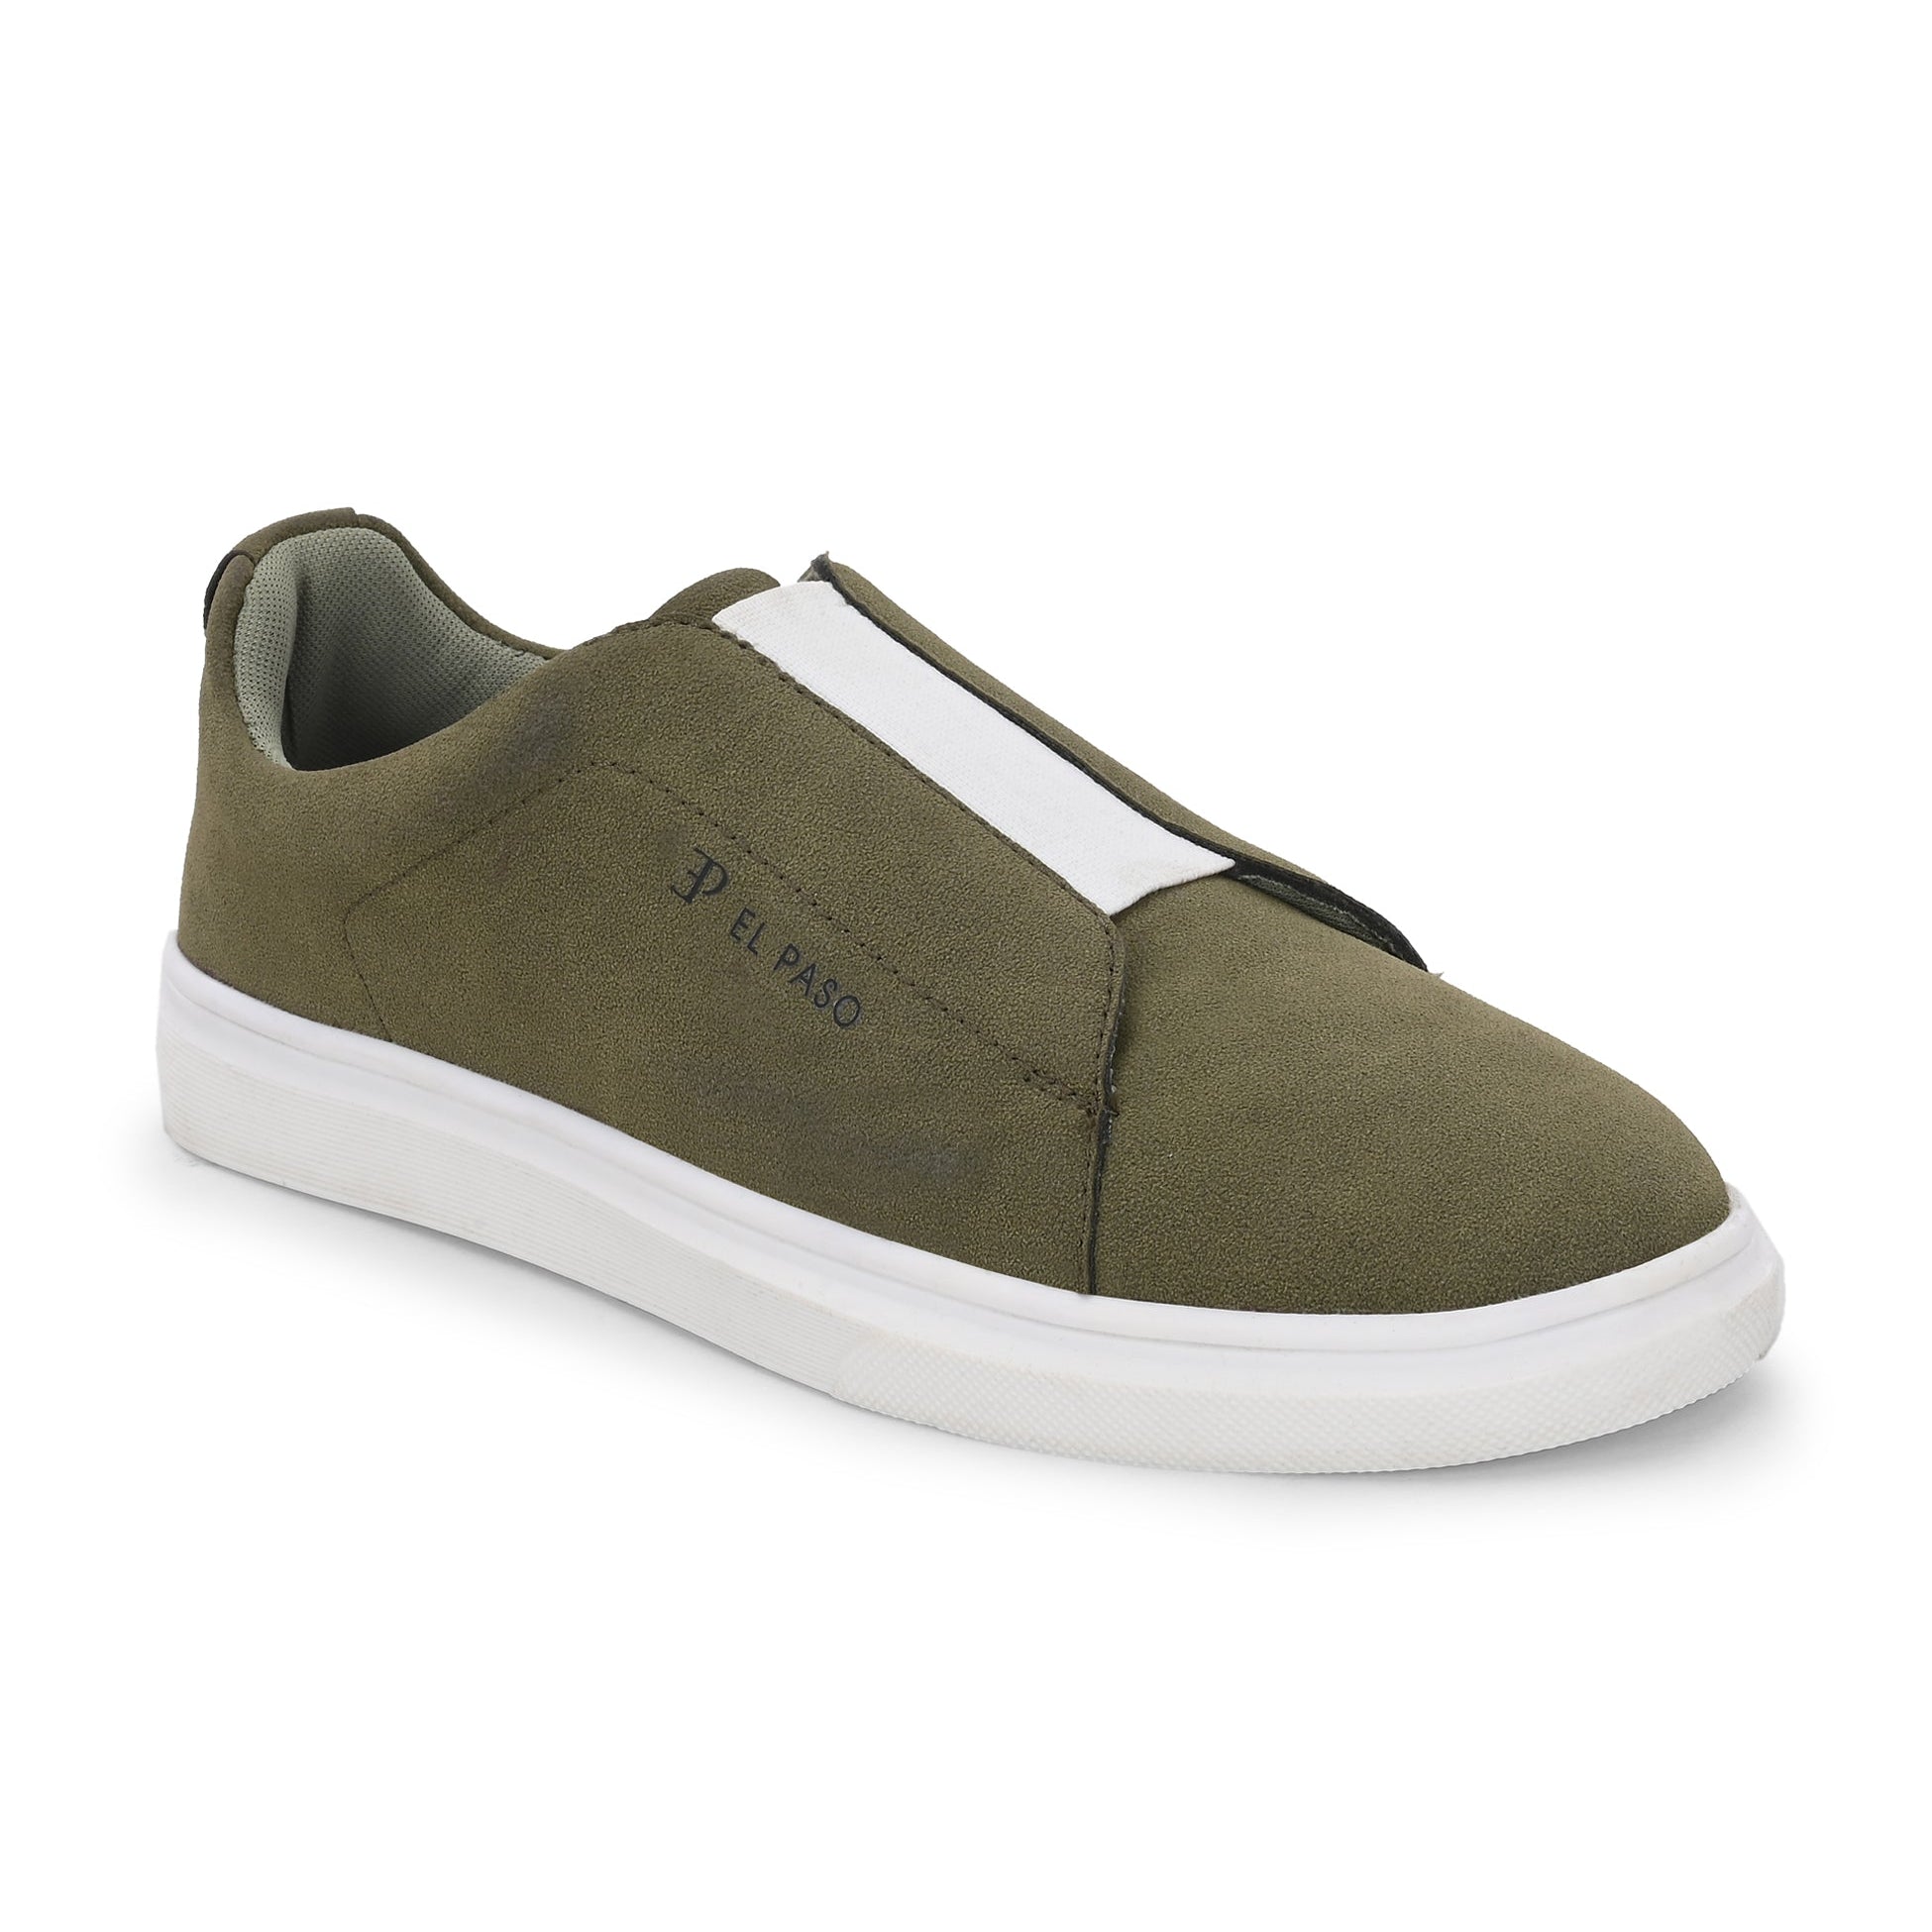 Olive colour Men's casual slip-on sneakers